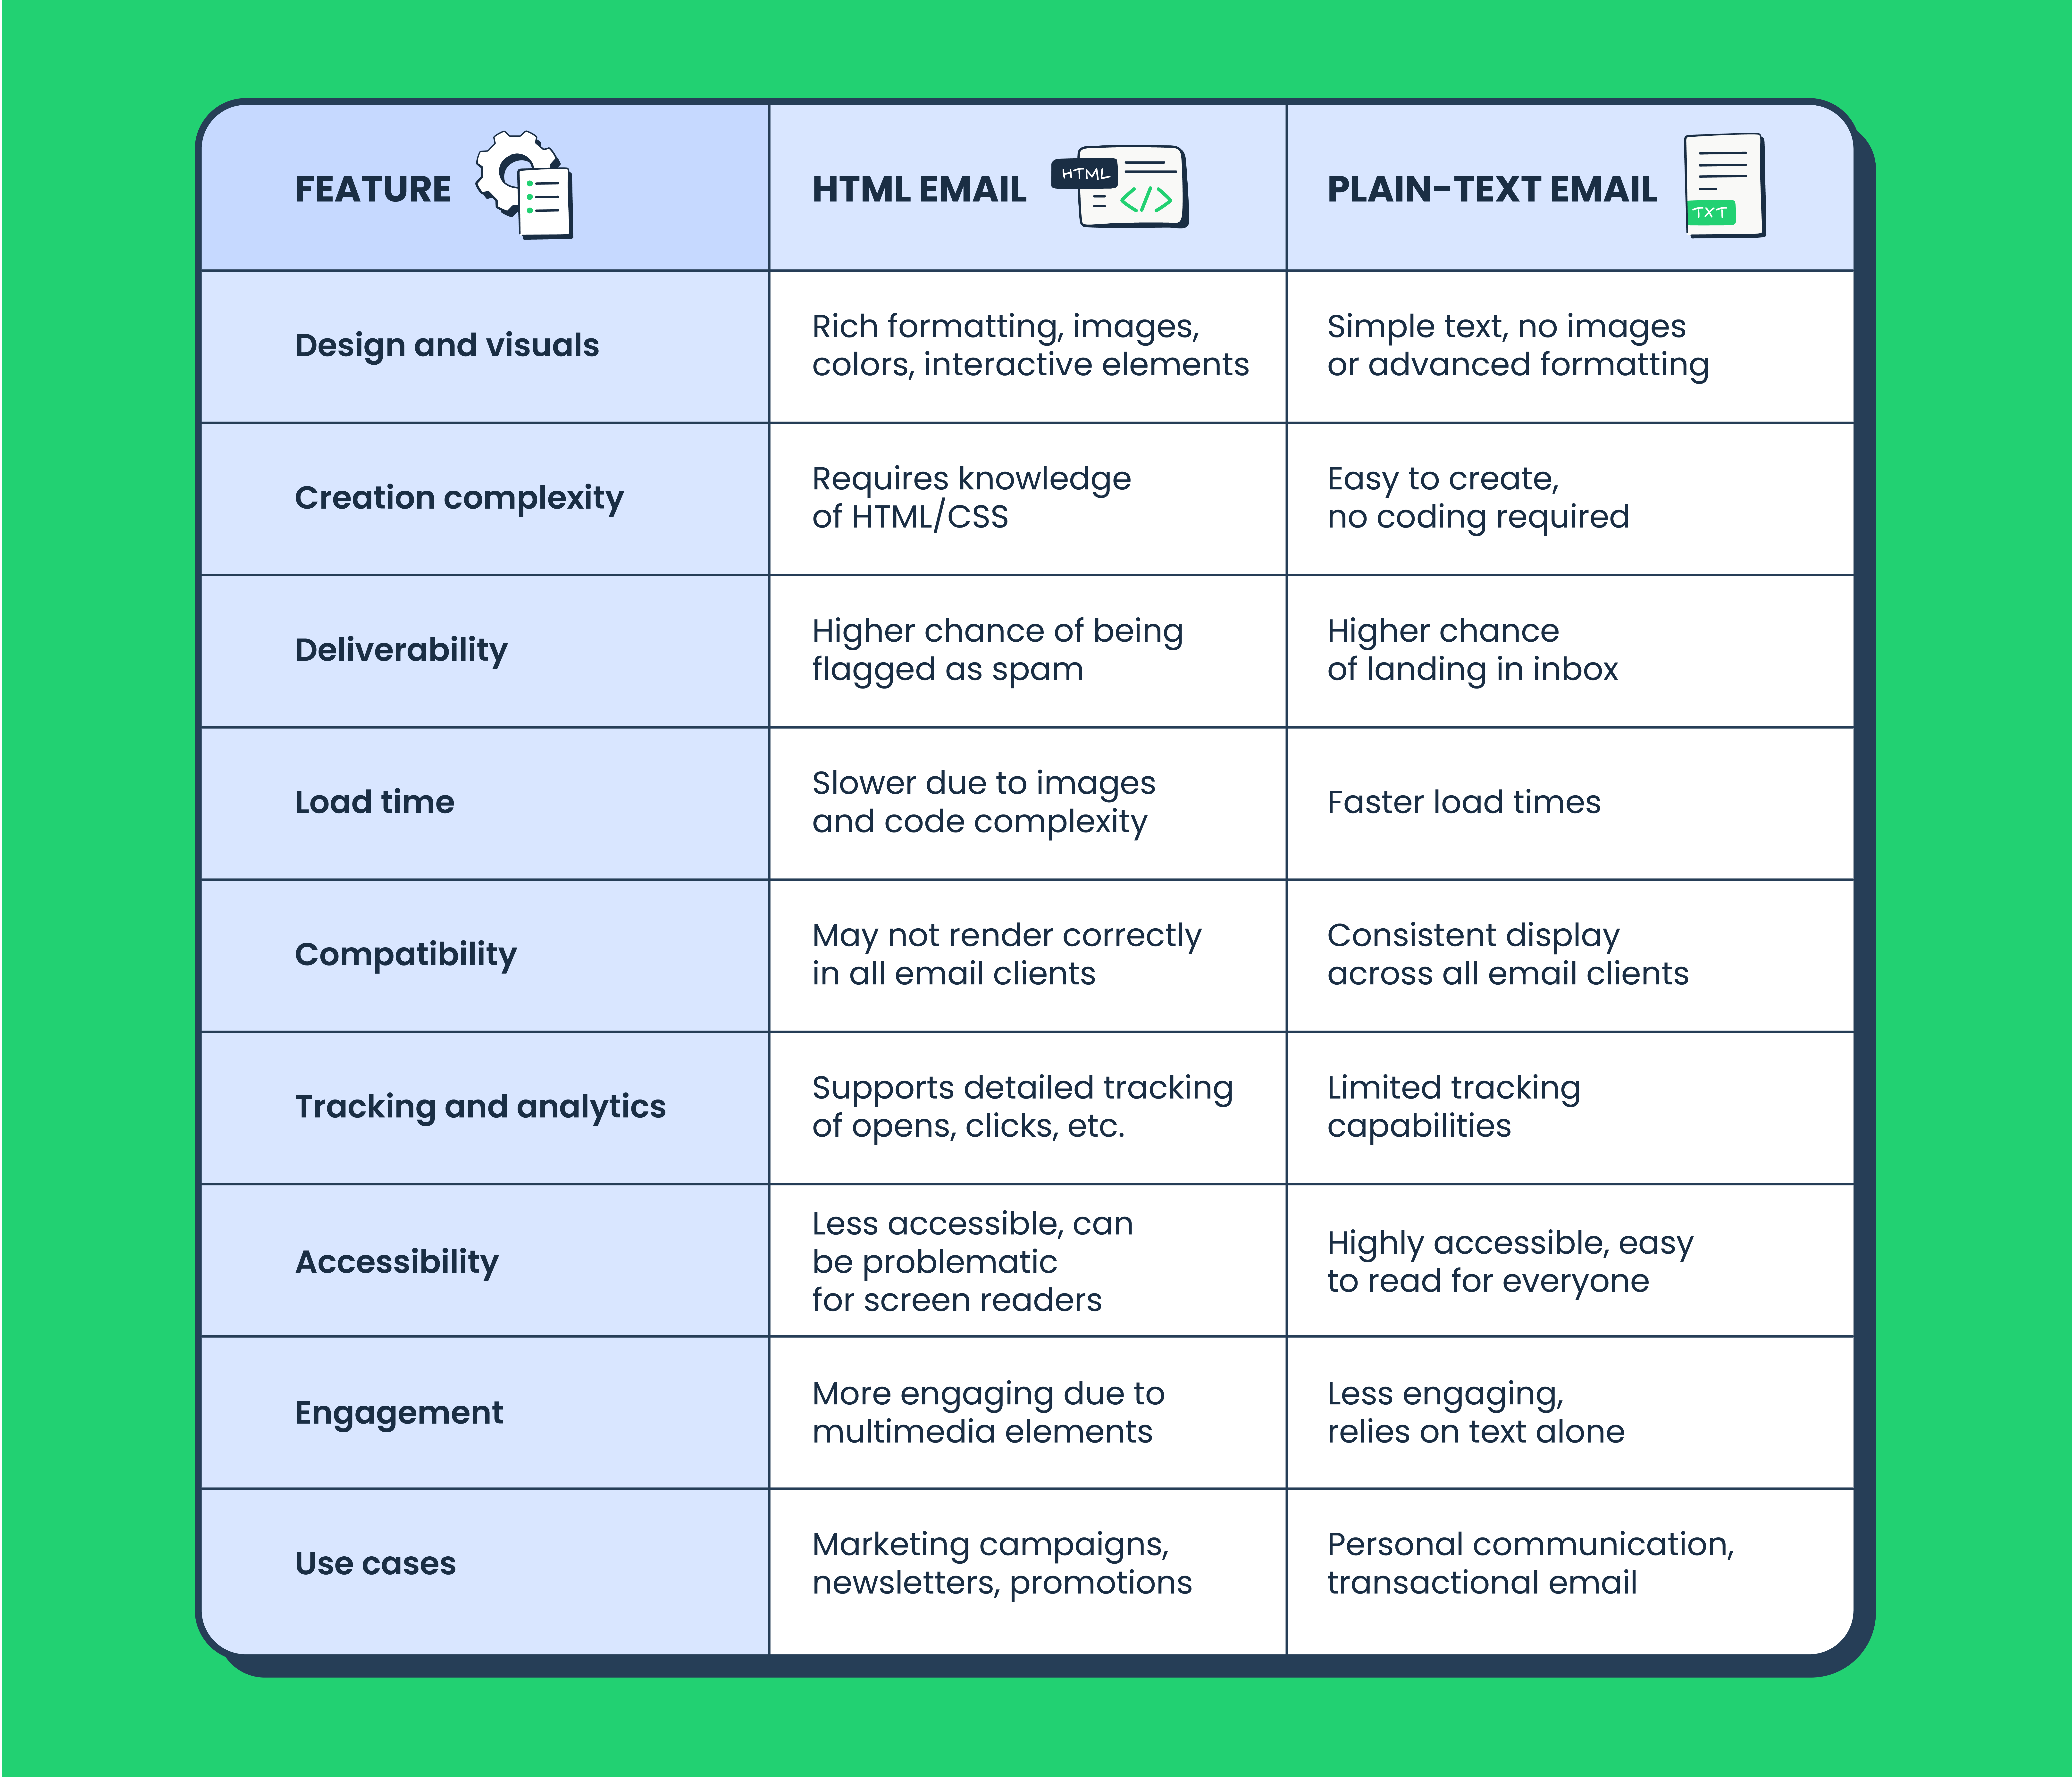 This graphics is a table listing all the differences between plain text and HTML emails